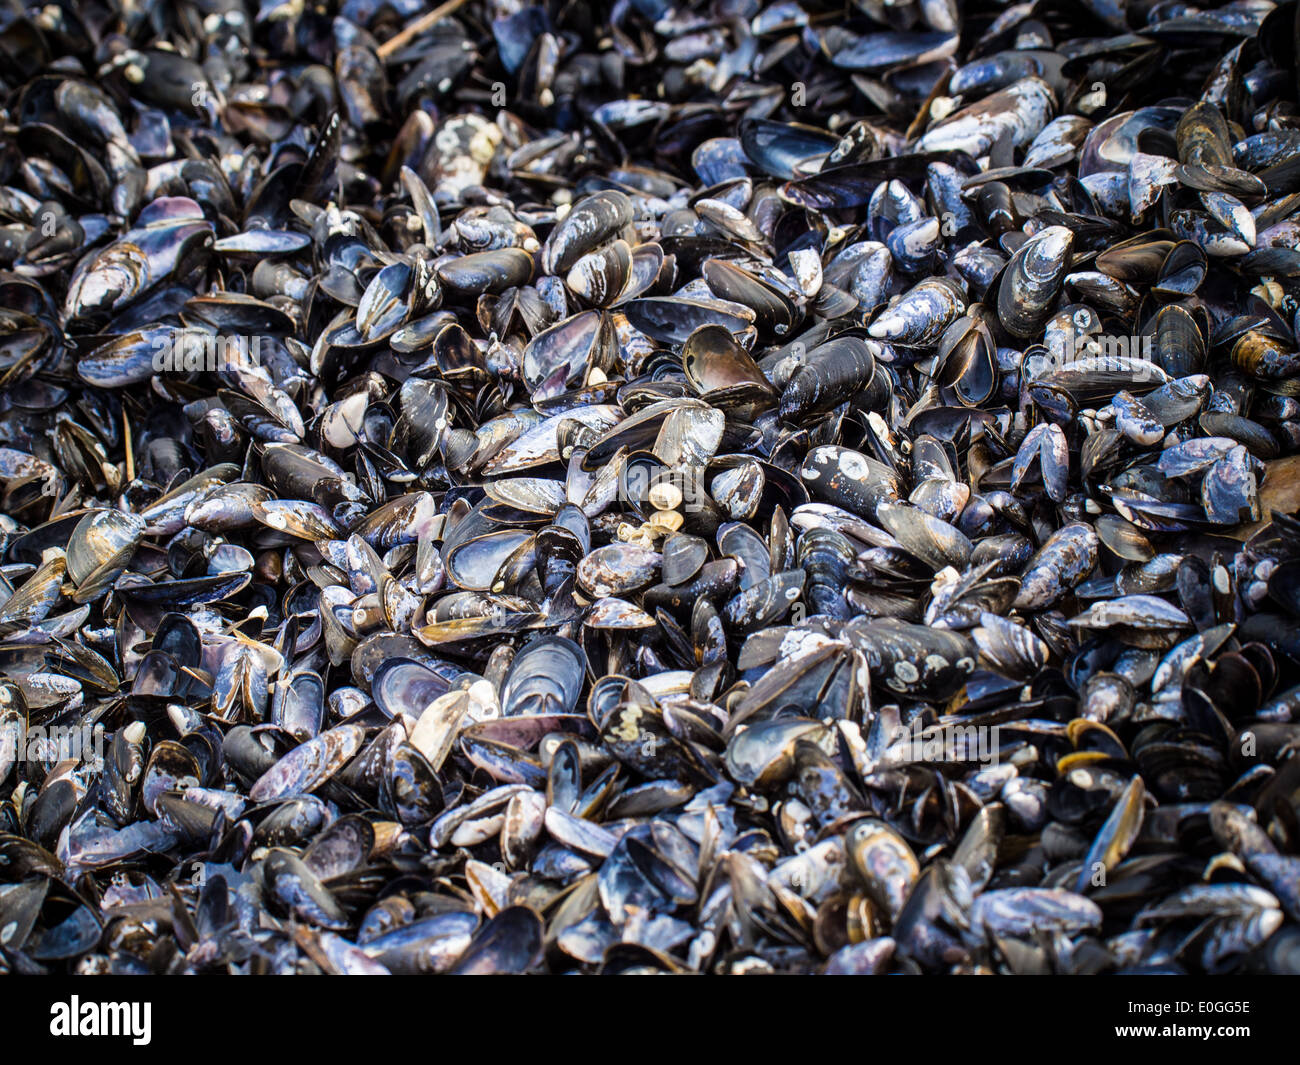 A pile of mussels Stock Photo